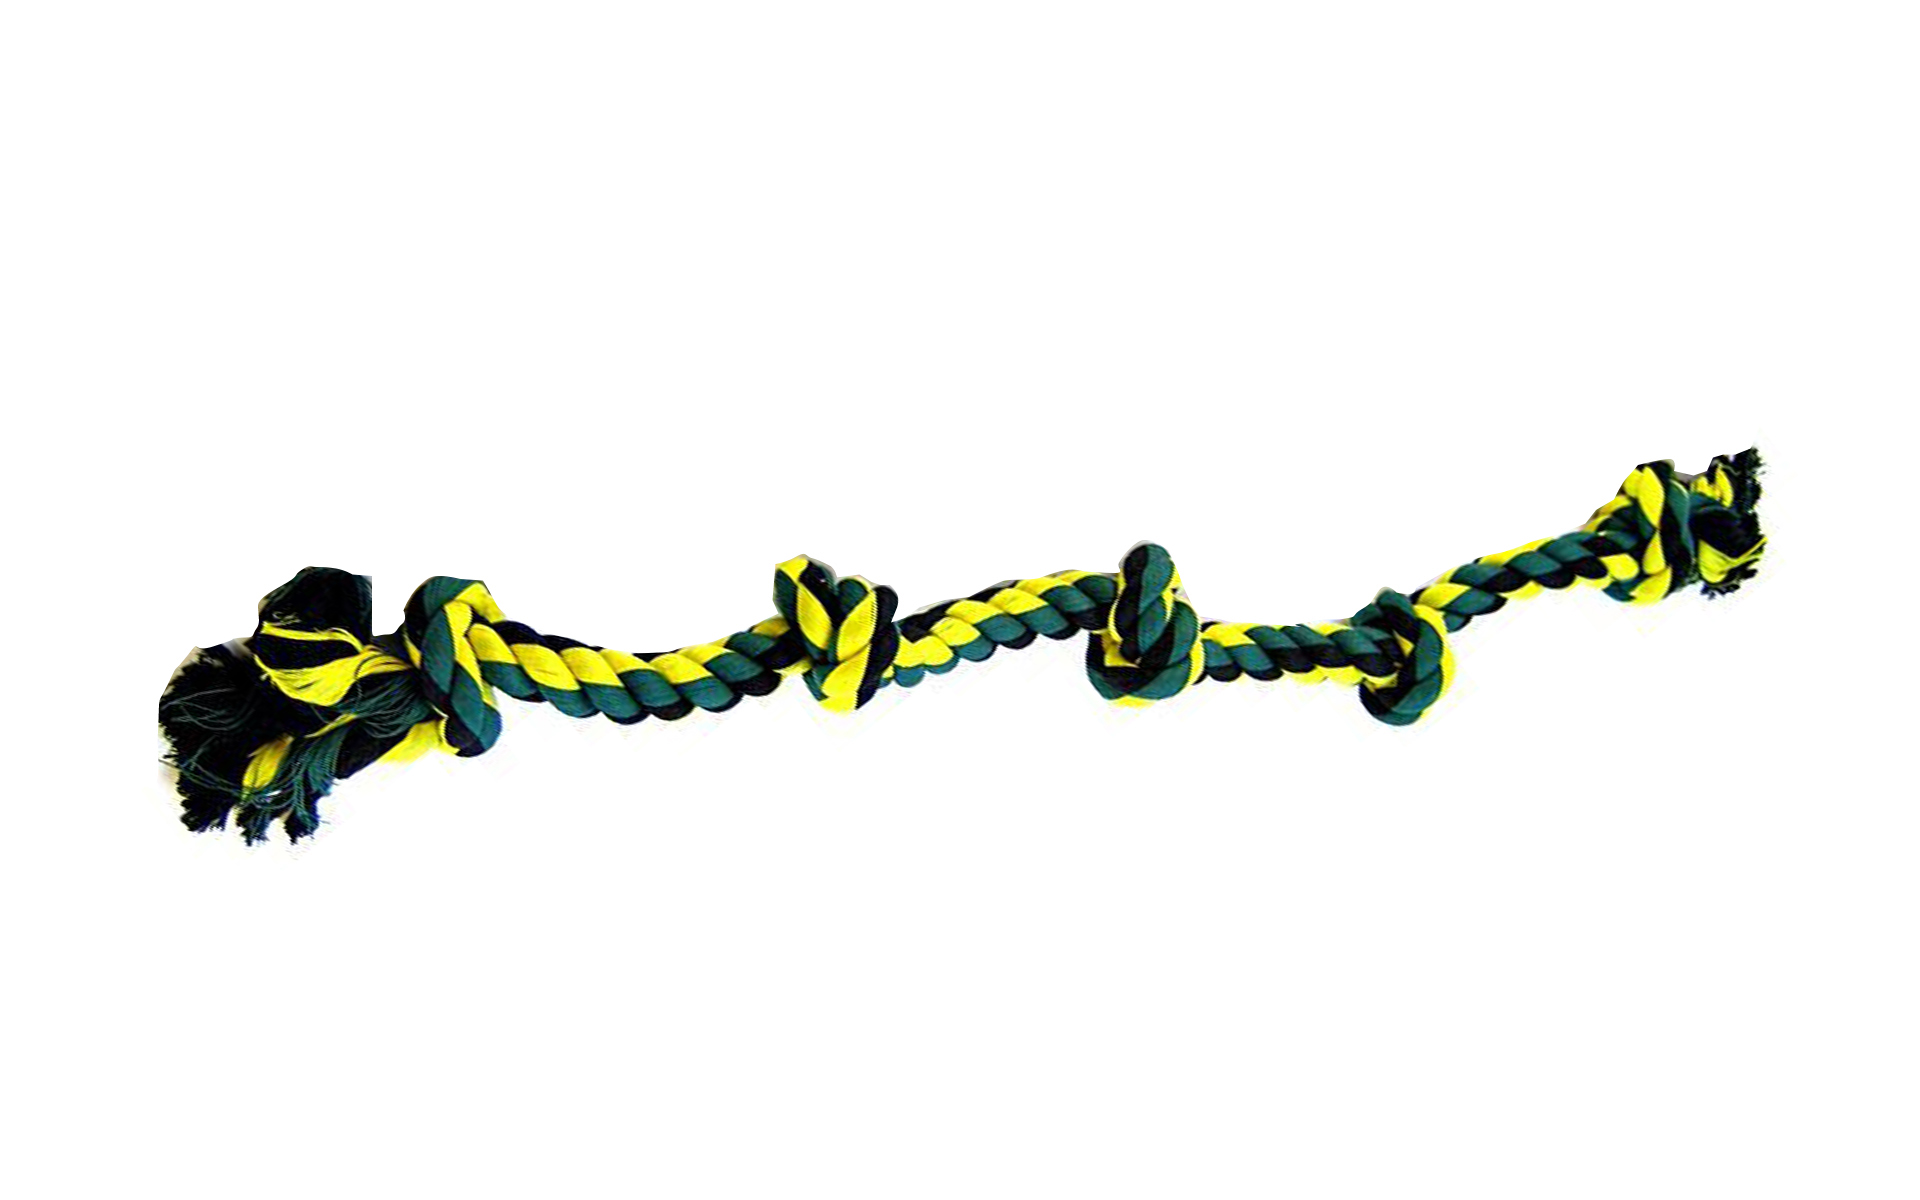 Flossy Chews Colored 5 Knot Tug Rope Super X-Large 6' Long